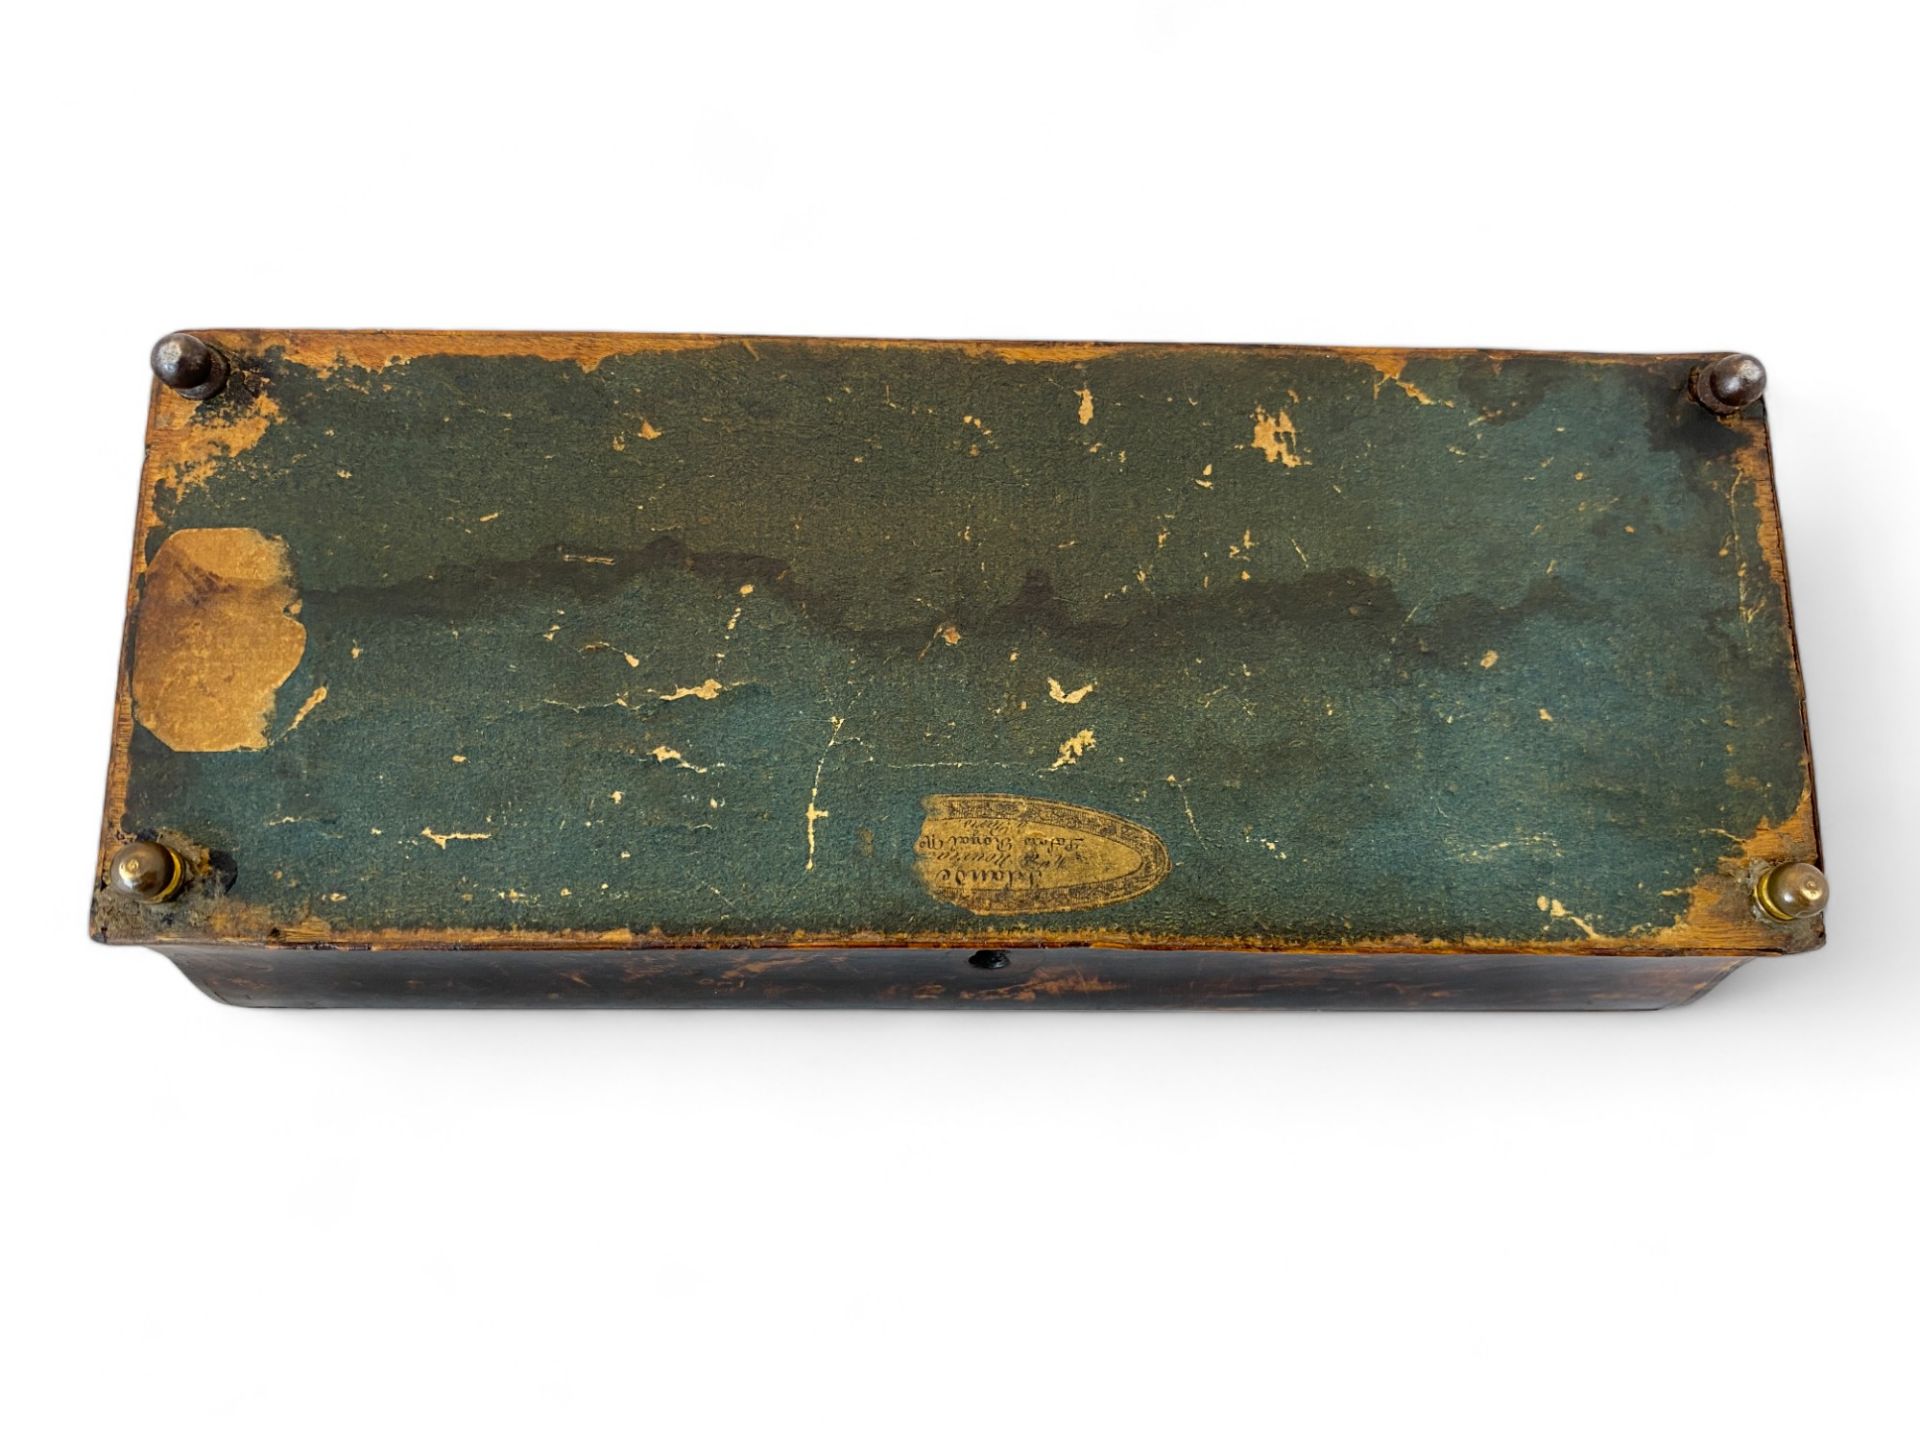 A mid 19th century French small burr walnut and cut steel decorated casket by Irlande, Palais Royal - Image 6 of 8